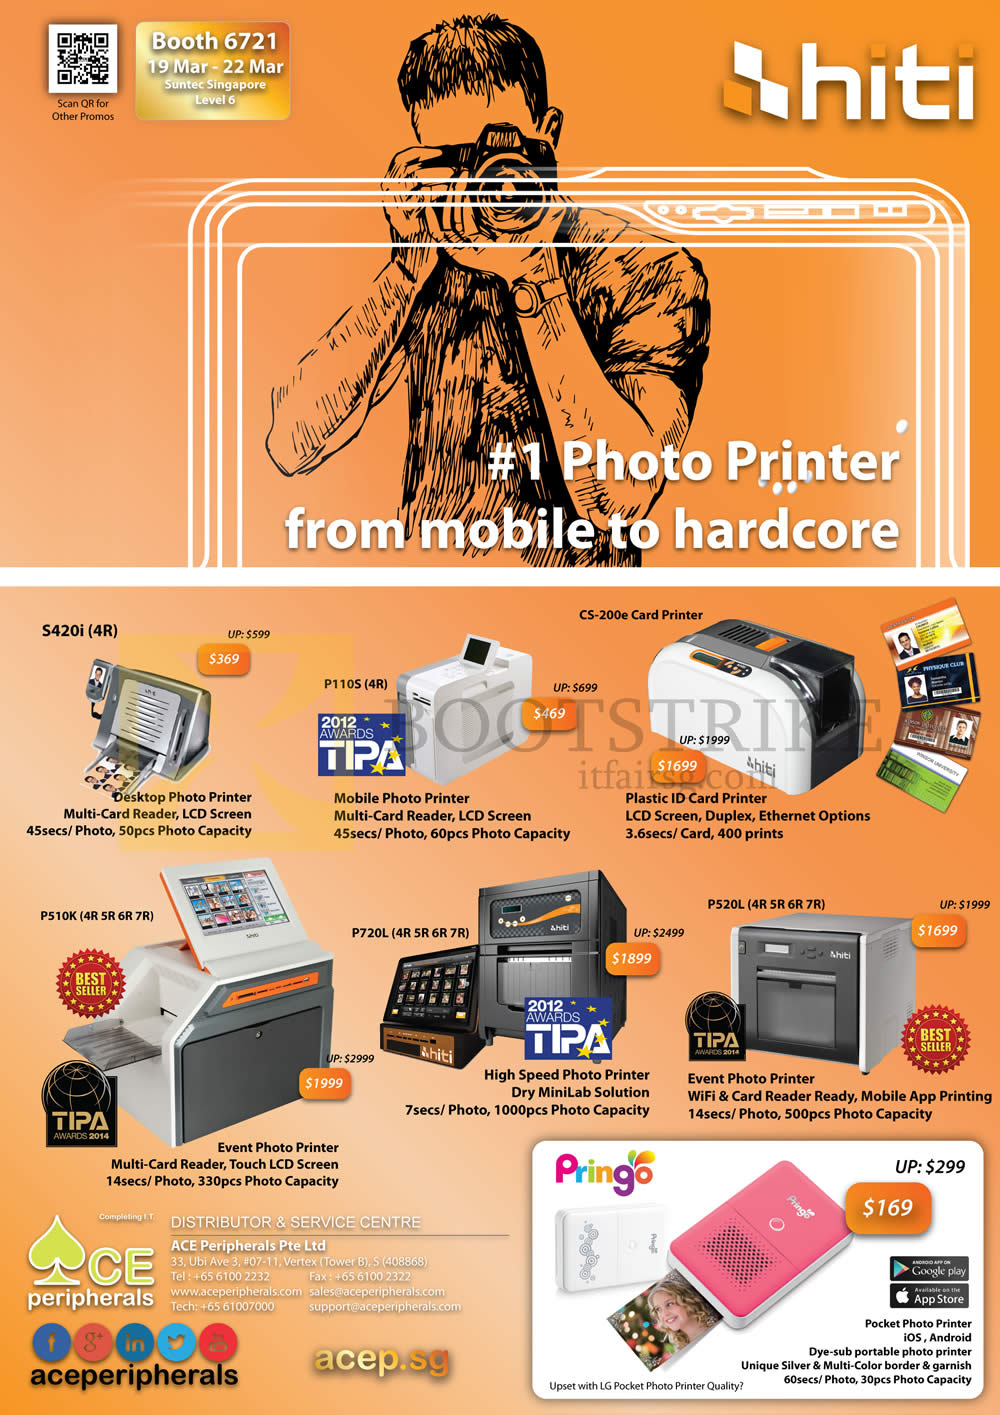 IT SHOW 2015 price list image brochure of Ace Peripherals HiTi Pringo Pocket P110S S420i P720L P520L P510K CS 200e Photo Card Printer